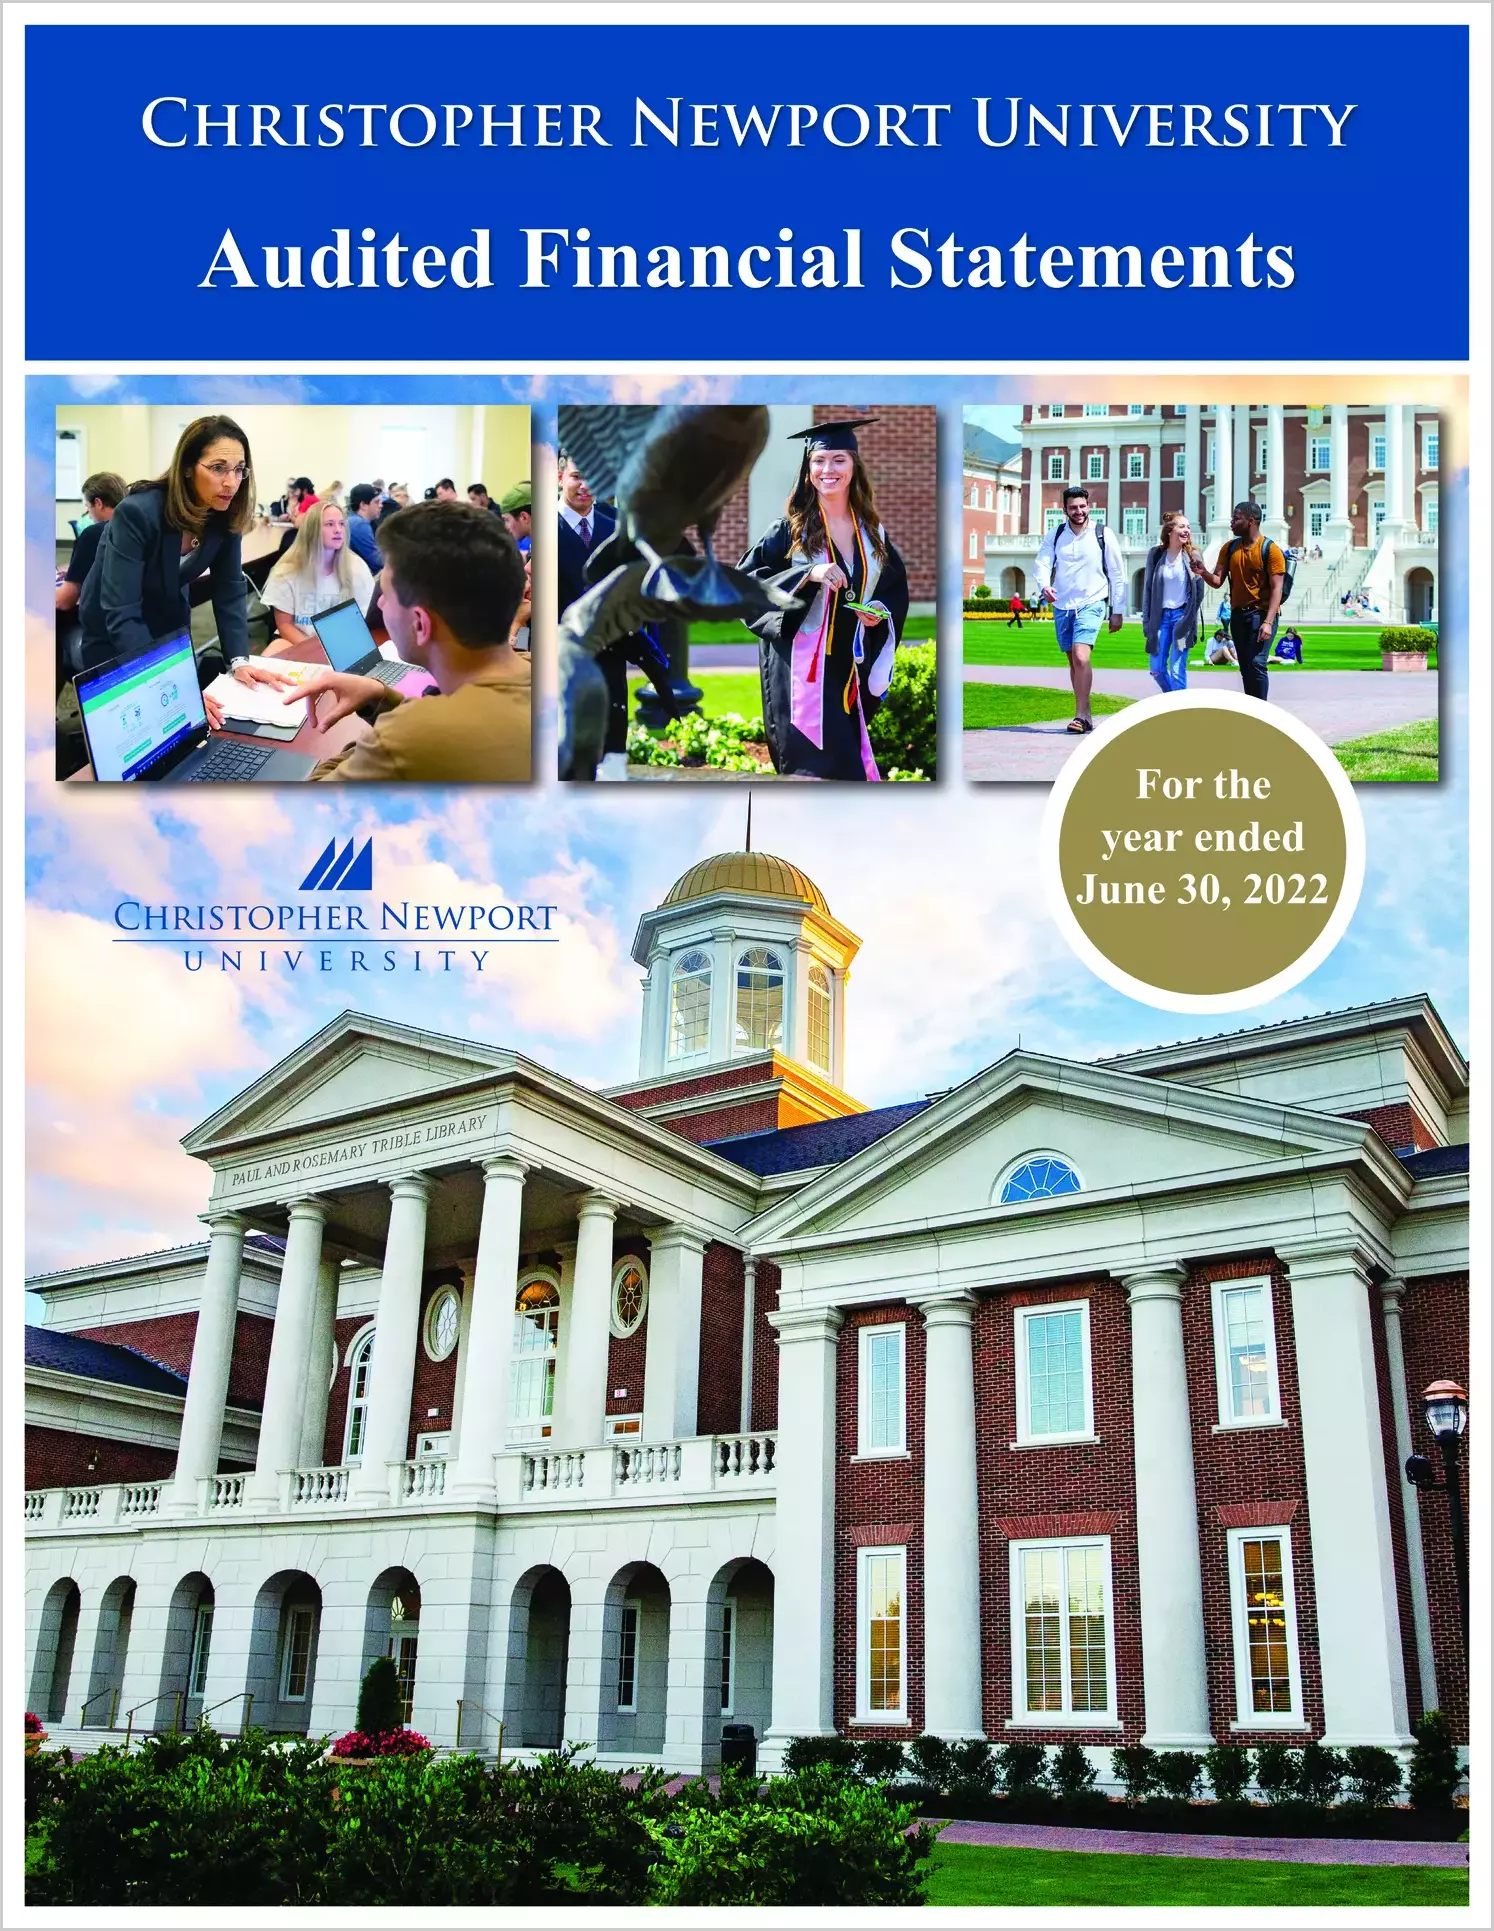 Christopher Newport University Financial Statements for the year ended June 30, 2022